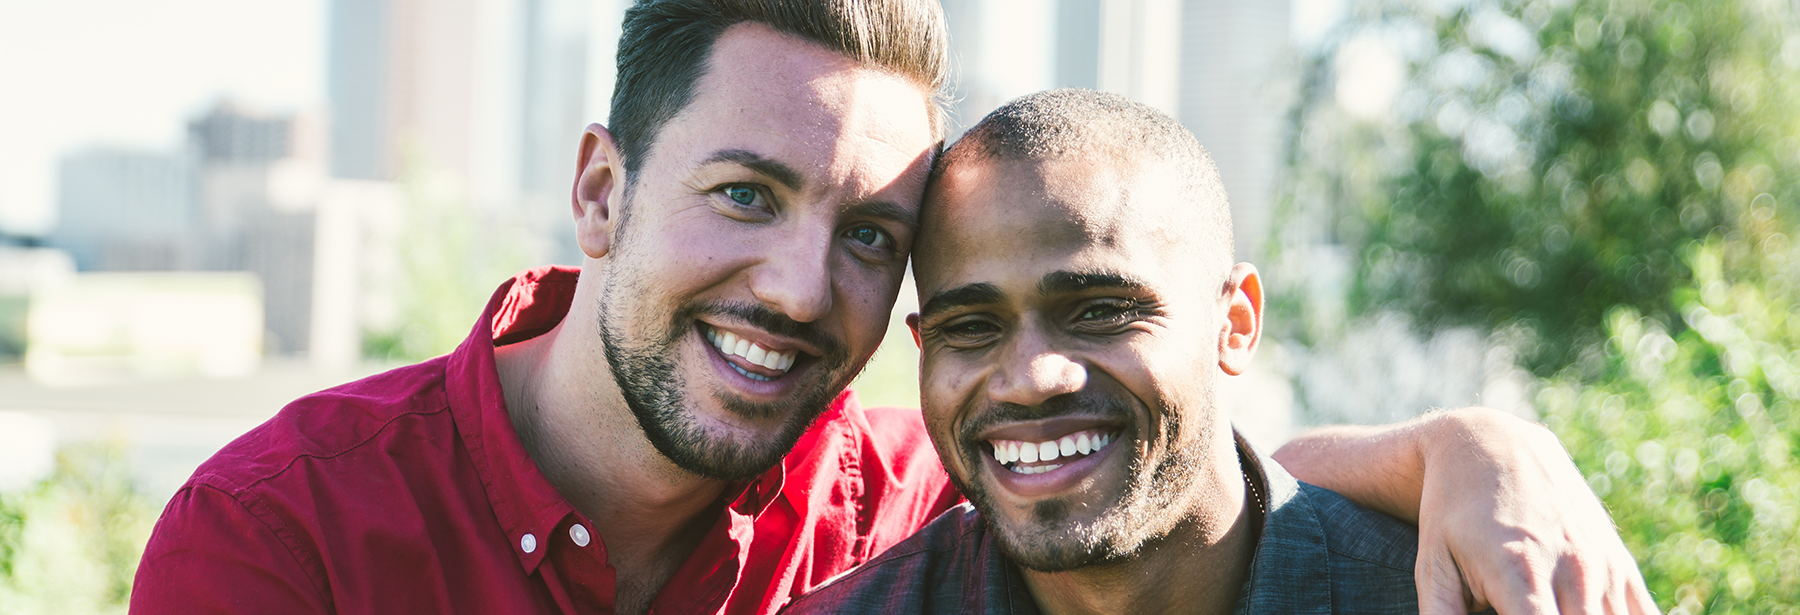 interracial gay couple smiling and hugging outdoors